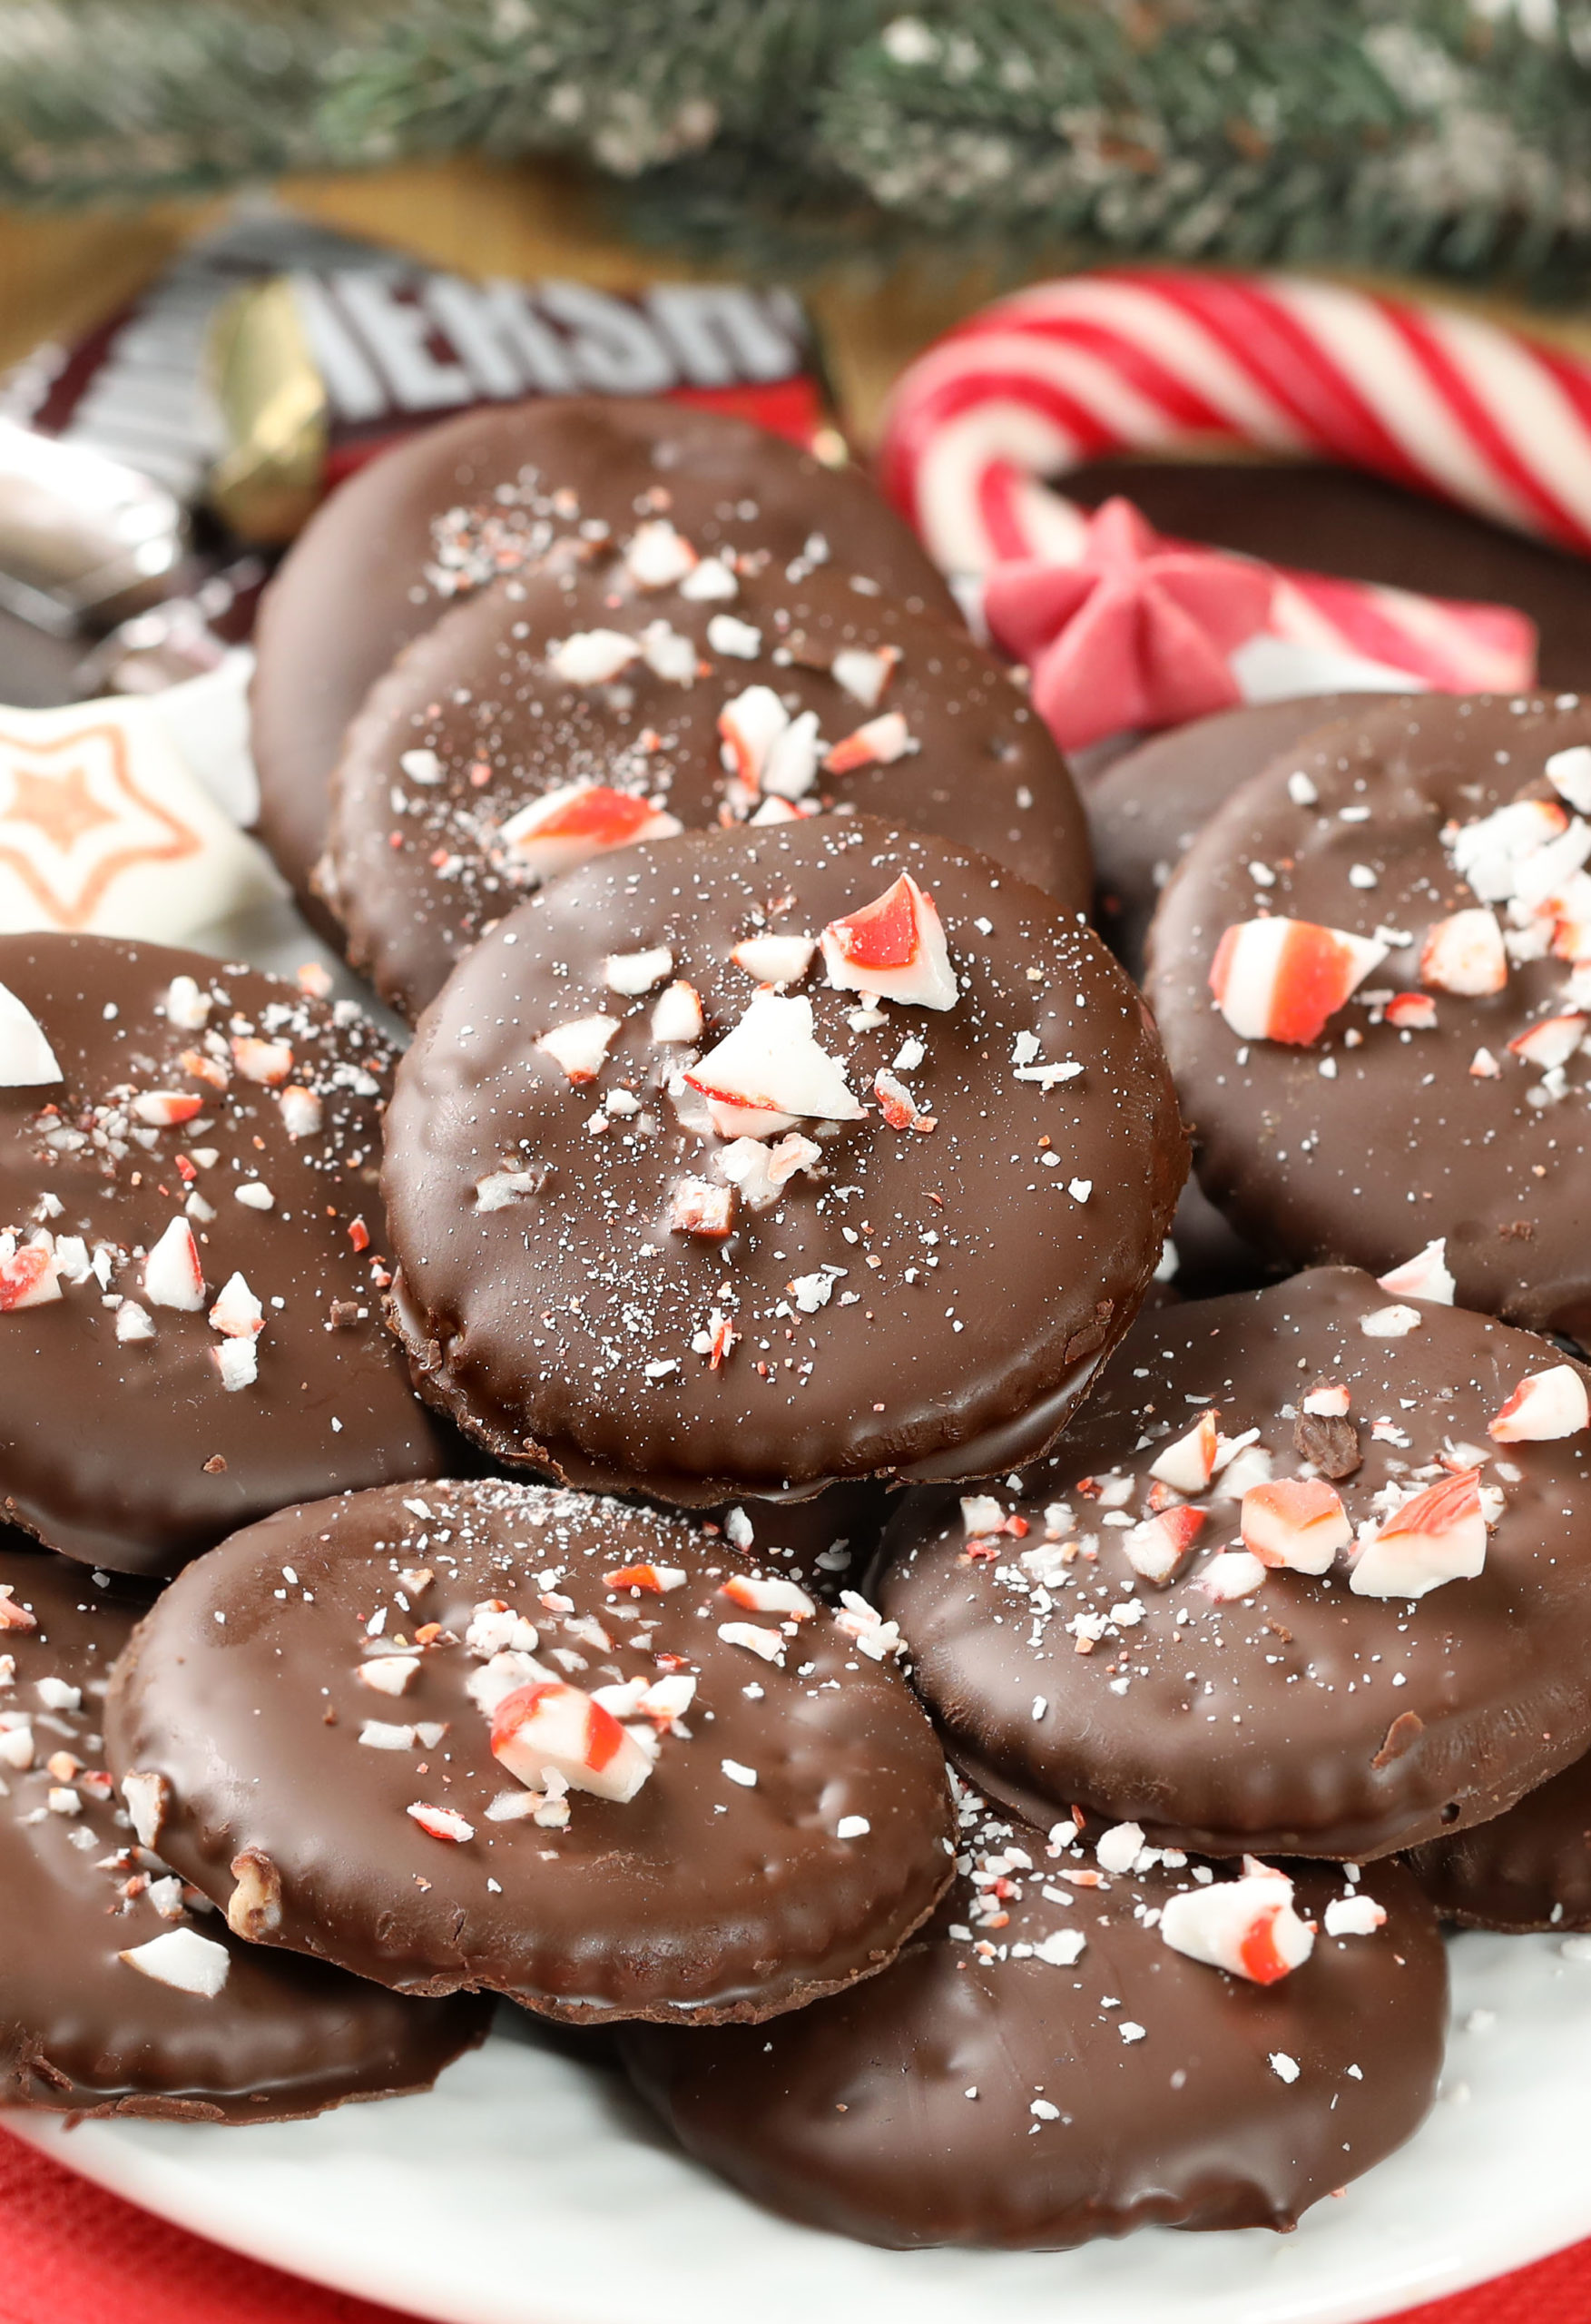 Thin Mint Ritz Crackers – an awesomely easy-to-make salty-sweet, peppermint-chocolate combo, using Ritz crackers, melted chocolate, and peppermint extract! Trust me. A match made in Heaven.